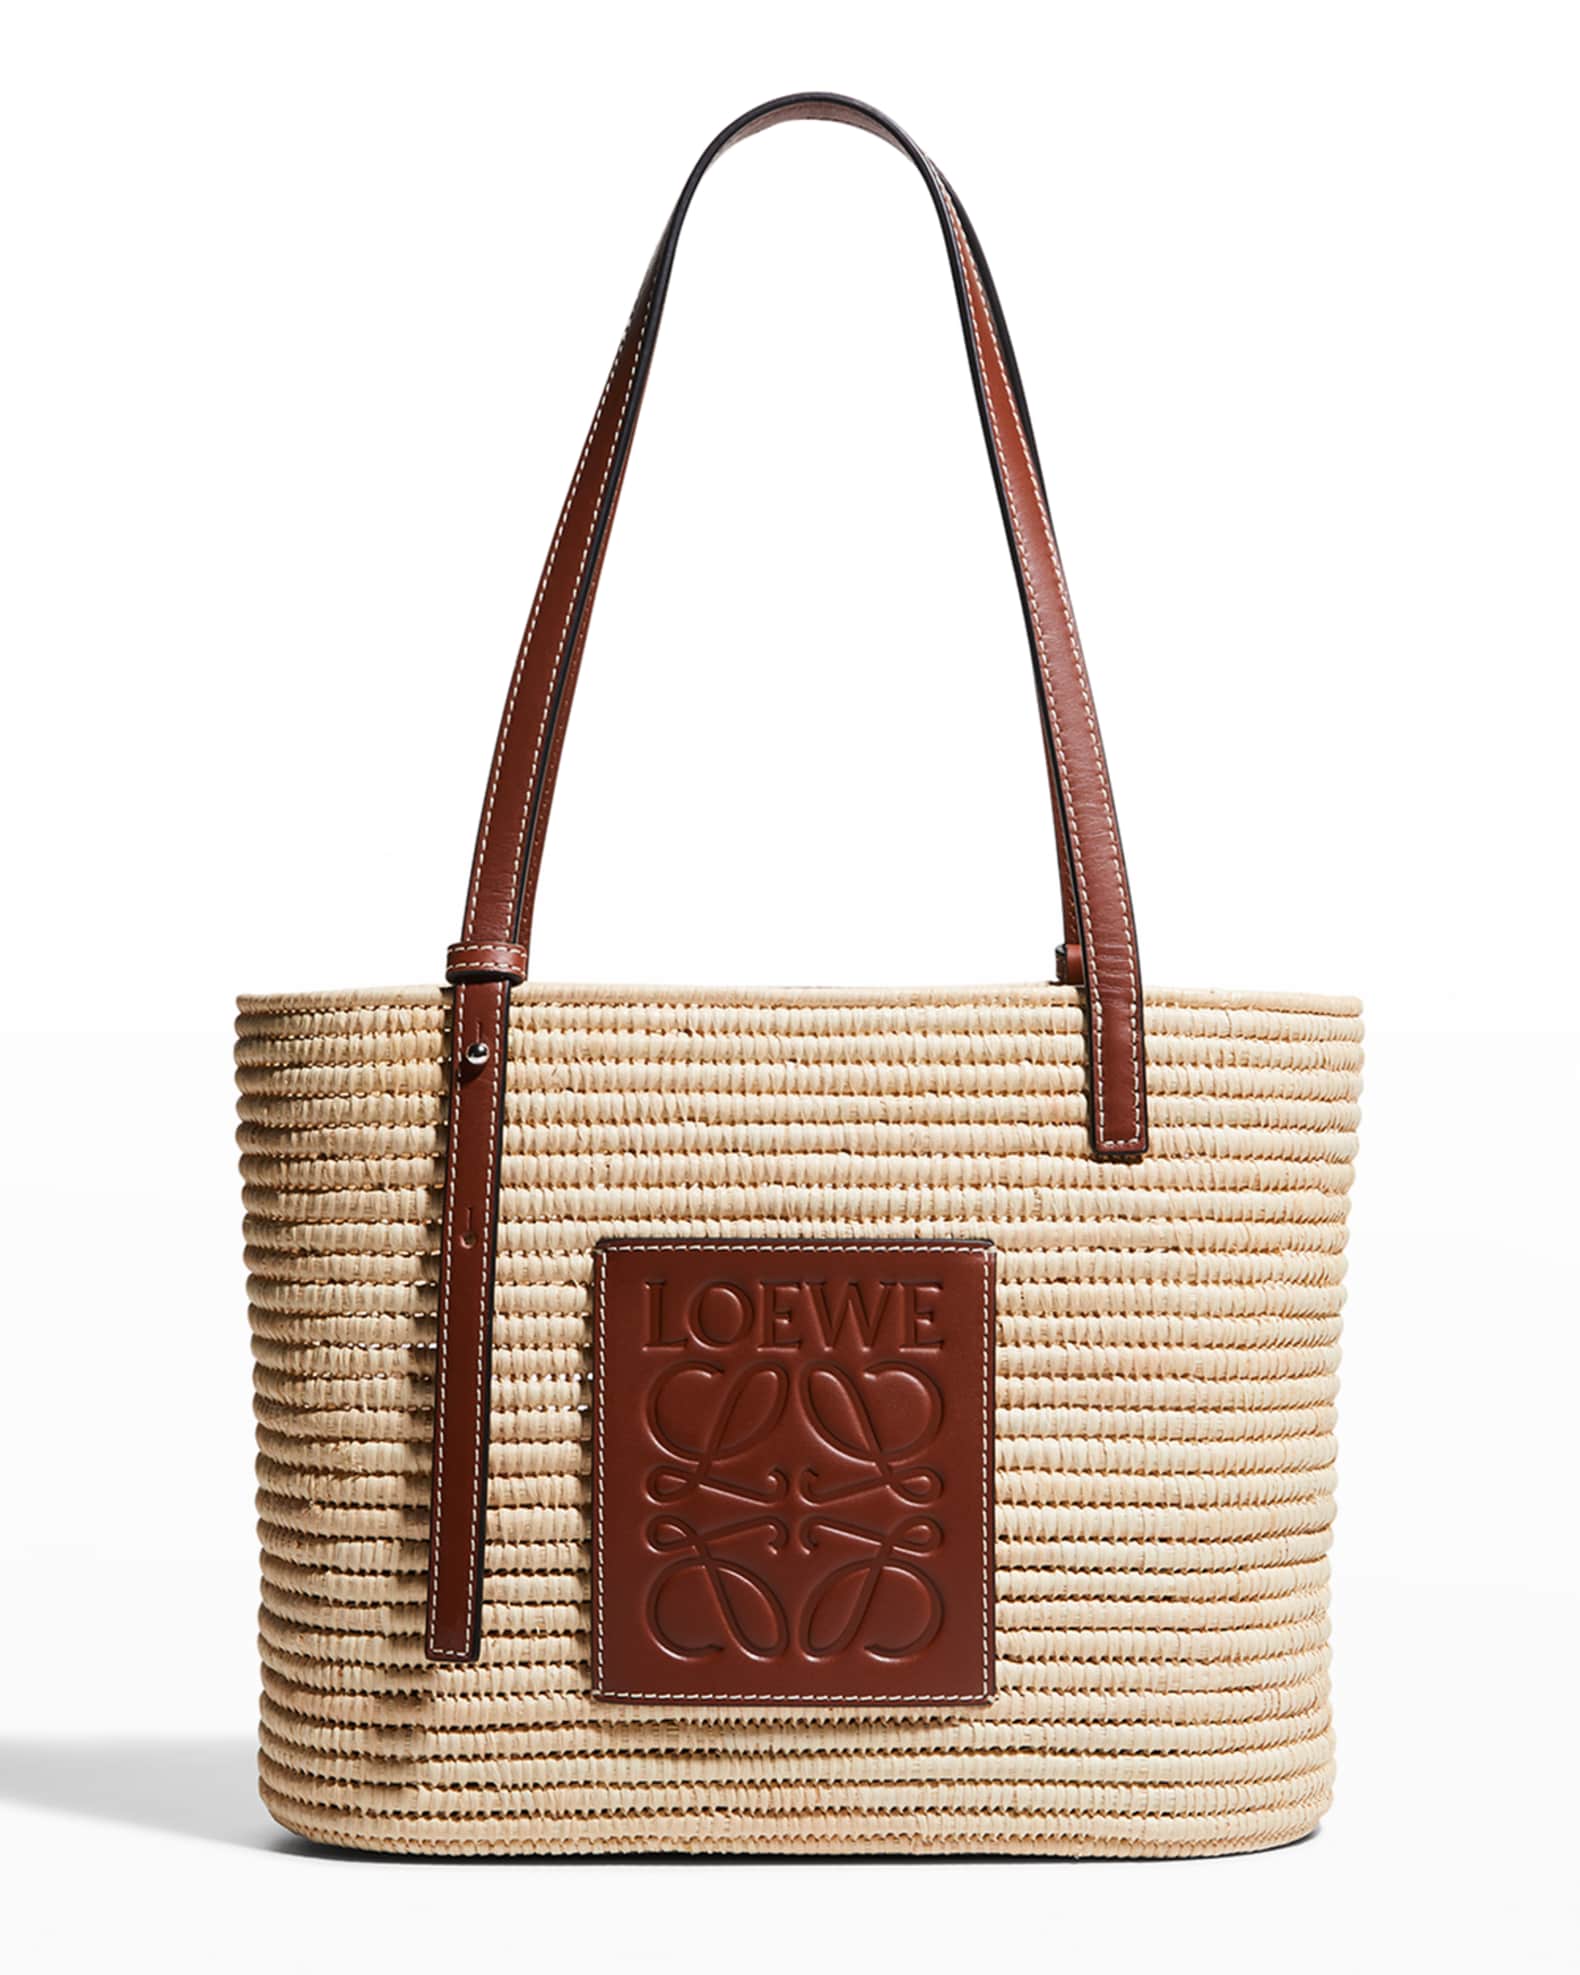 x Paula's Ibiza Square Basket Small Bag in Raffia with Leather Handles | Neiman Marcus